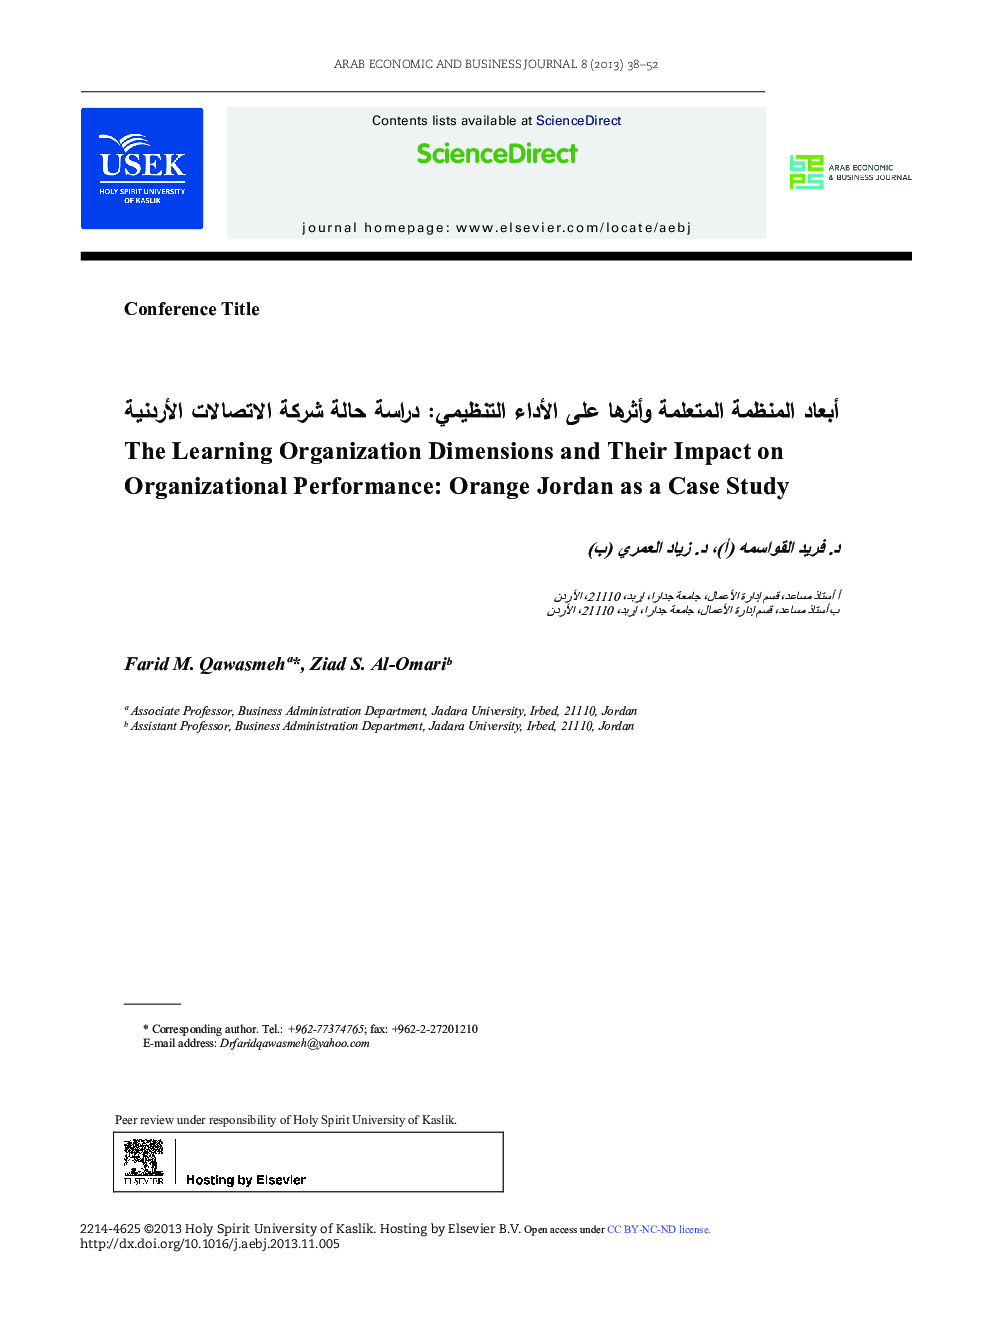 The Learning Organization Dimensions and Their Impact on Organizational Performance: Orange Jordan as a Case Study 